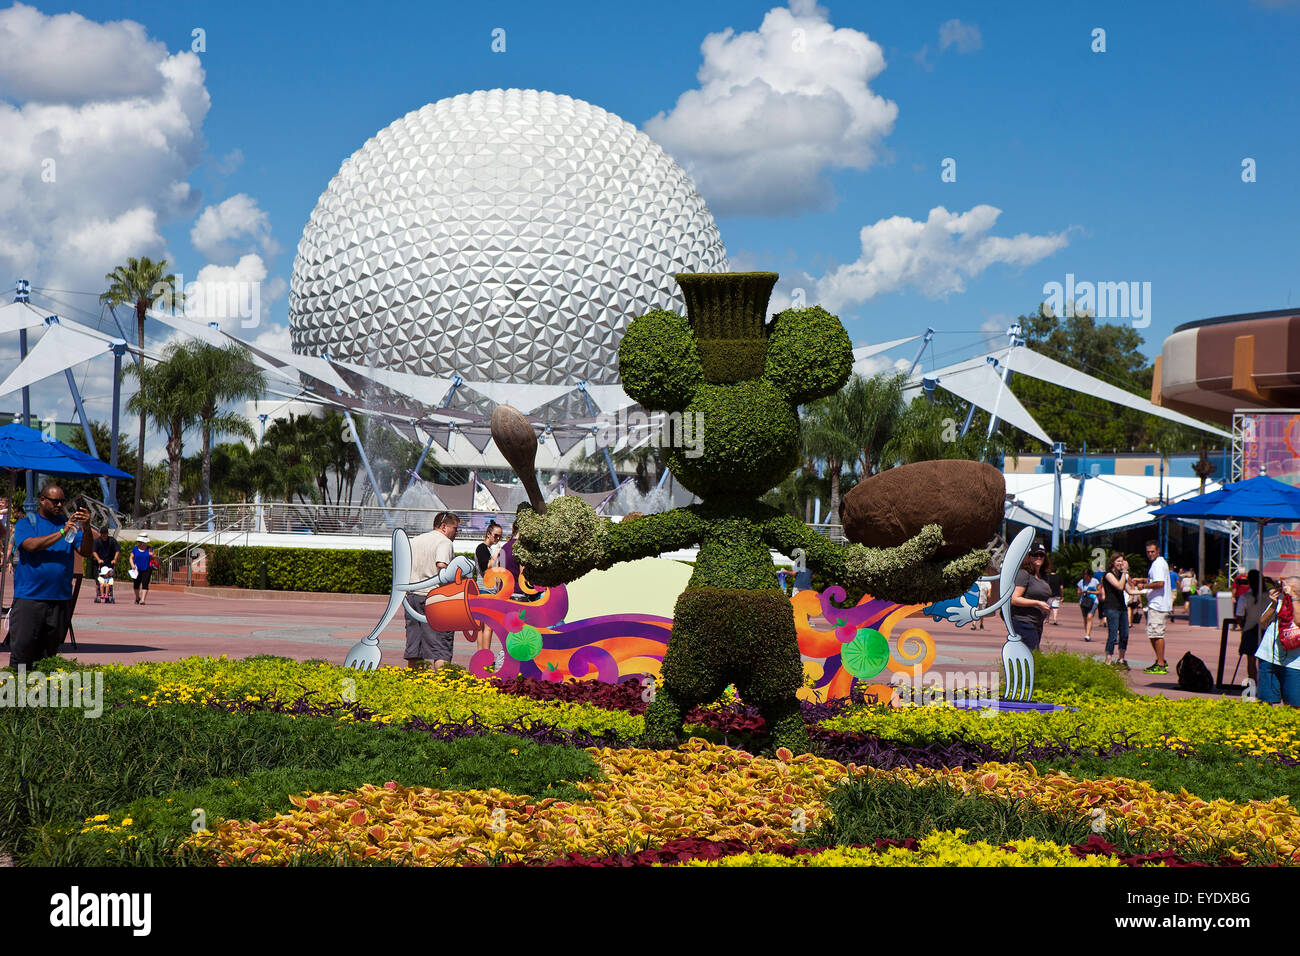 Mickey Mouse bush in front of Spaceship Earth, Epcot Center, Walt Disney World Resort, Orlando, Florida, United States of America Stock Photo